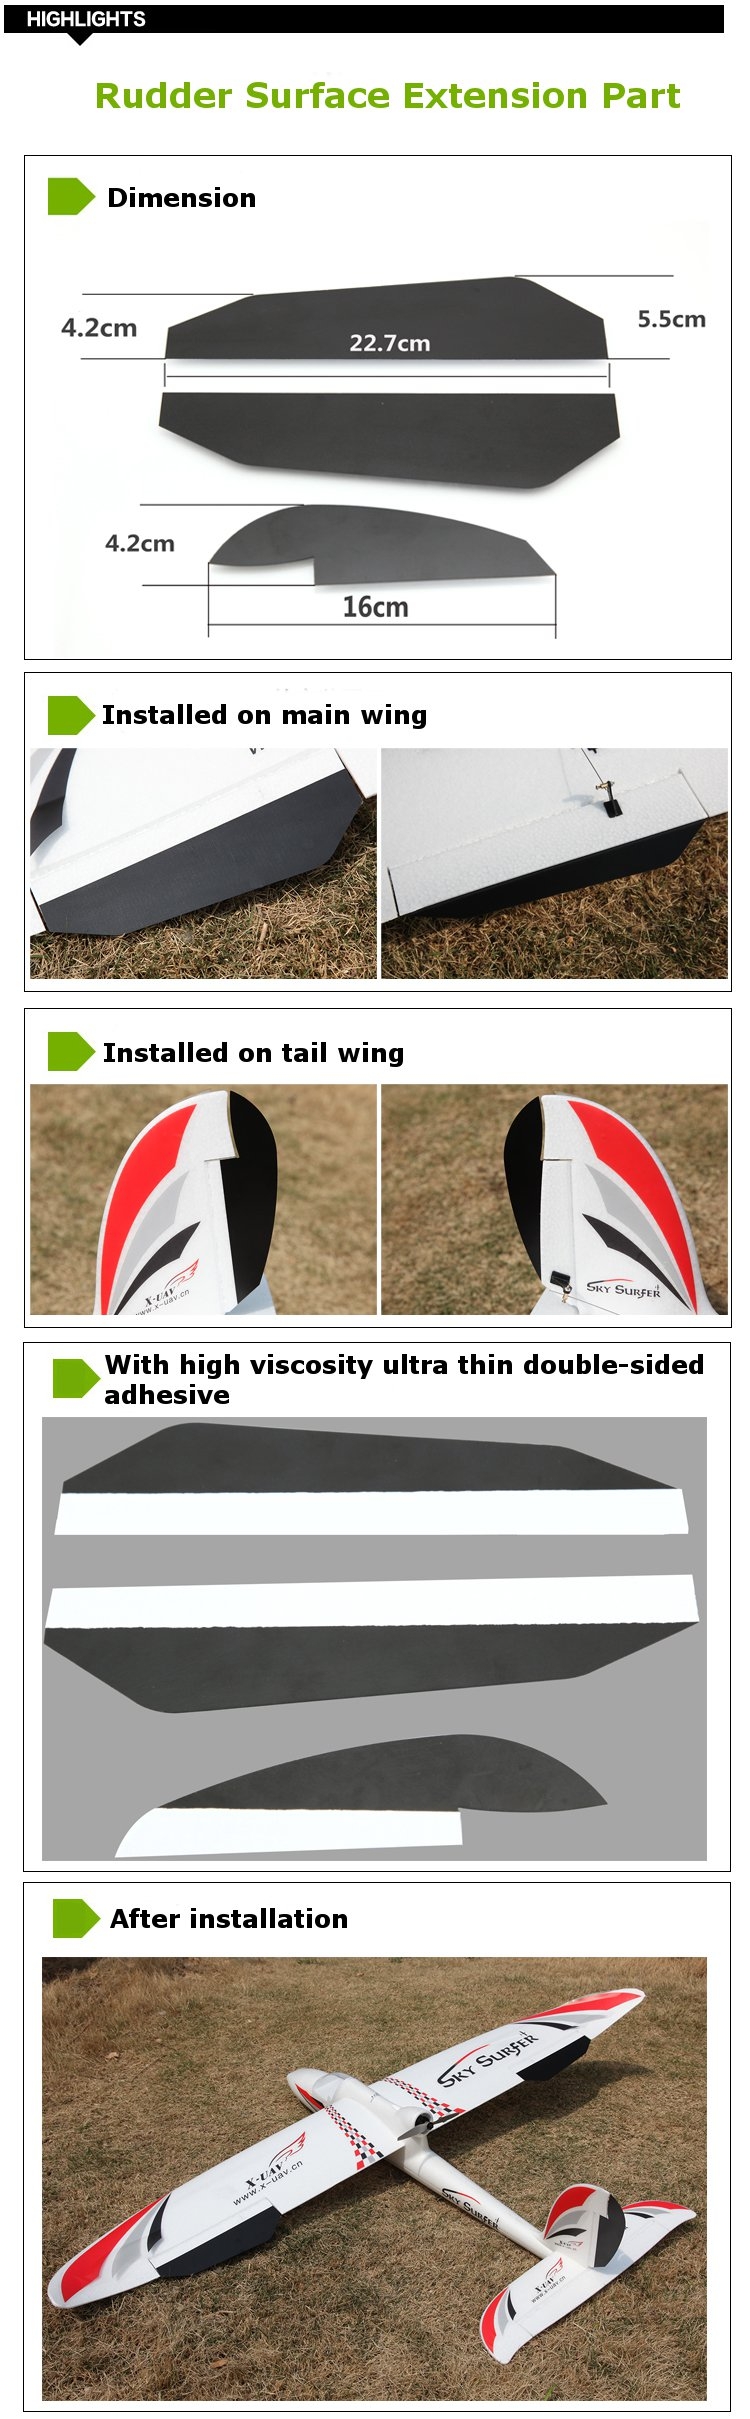 Glassfiber Cicada Wing Rudder Surface Extension Part For X-UAV Sky Surfer X8 RC Airplane